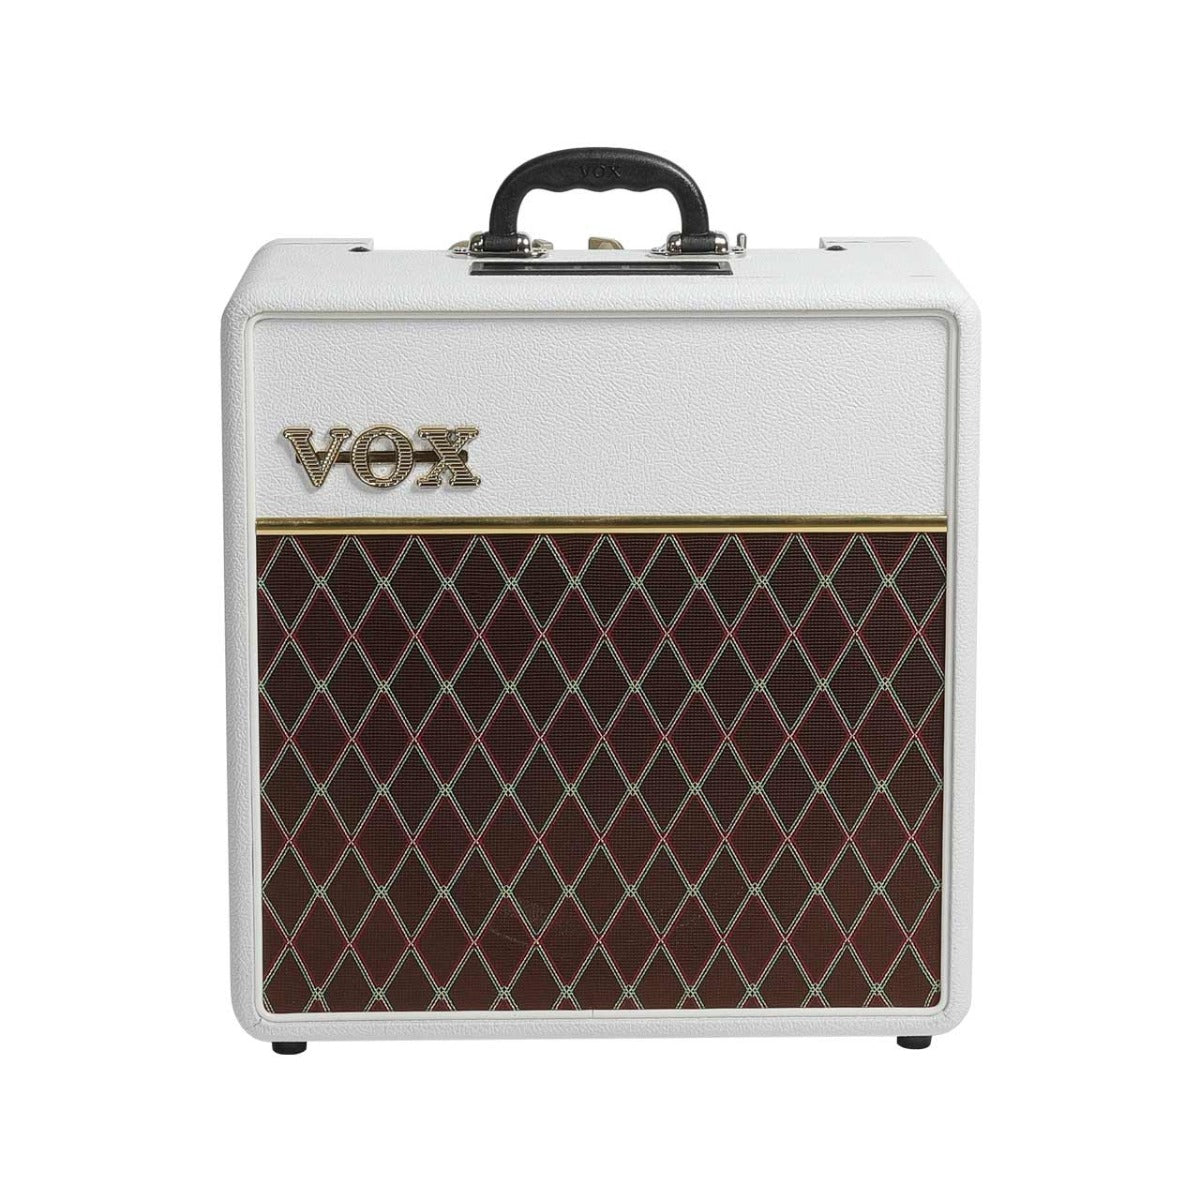 Vox AC4C1 12 WB White Limited Edition